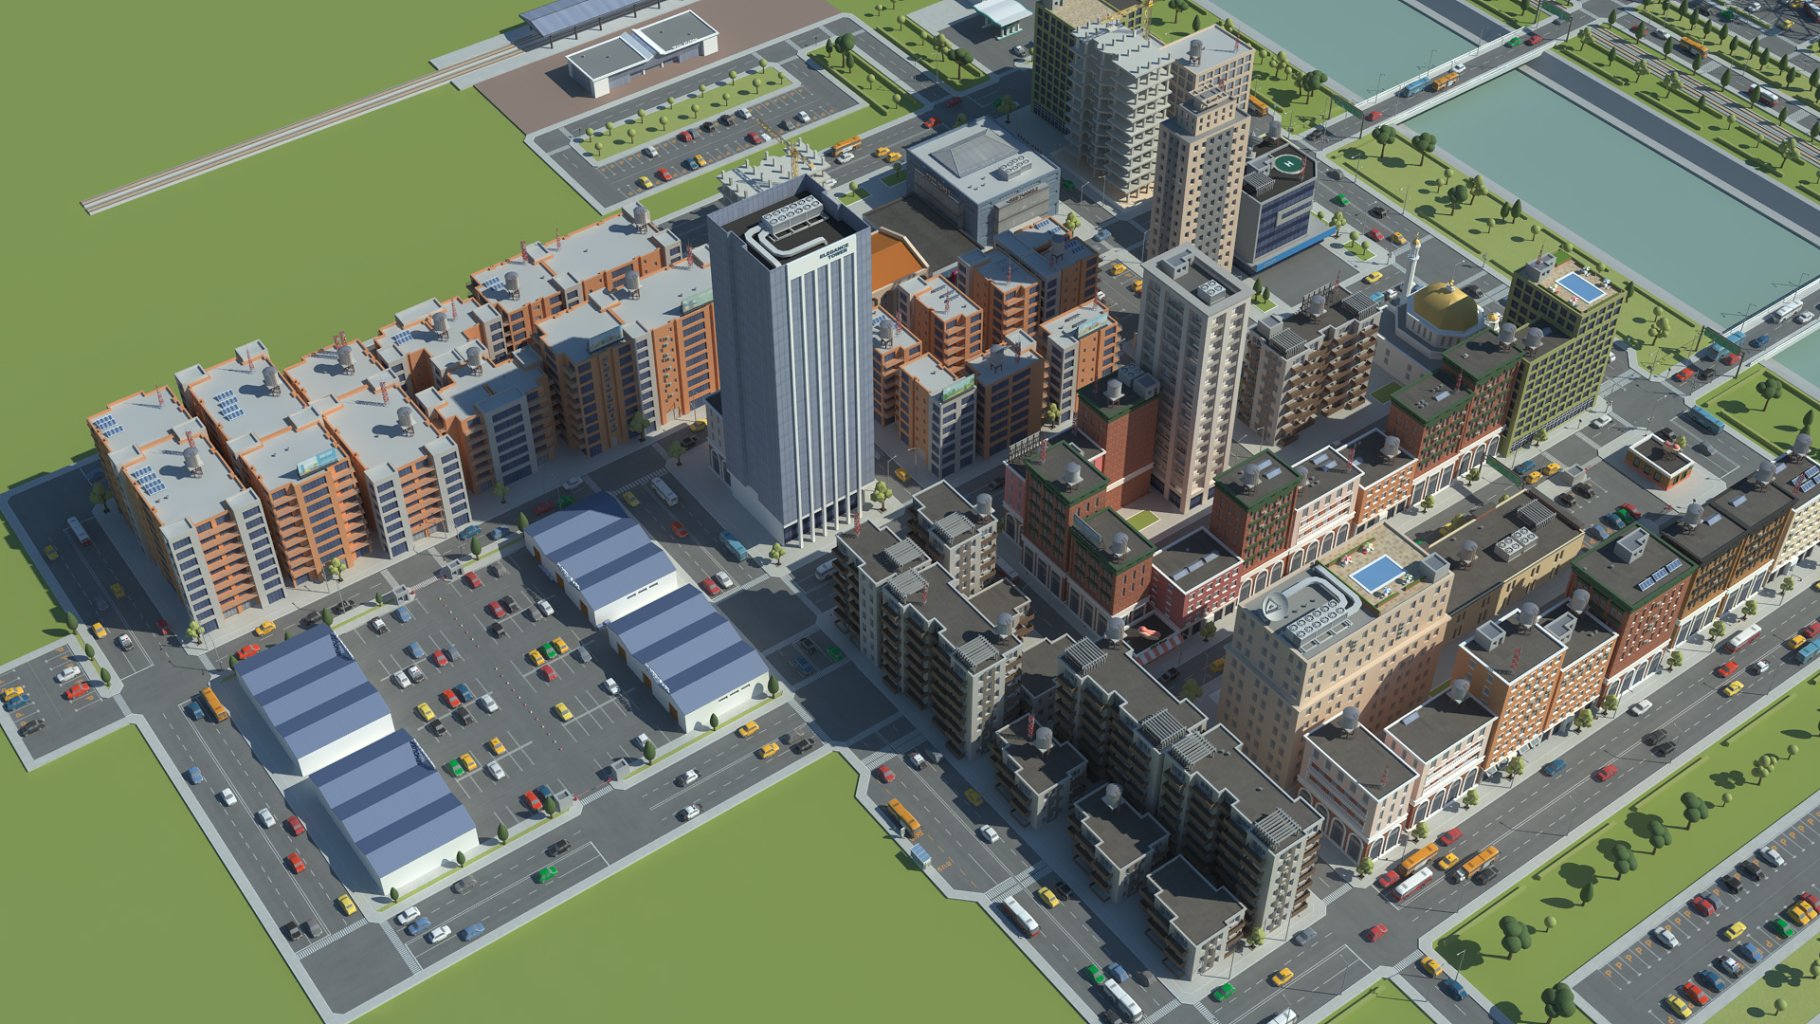 Rendering of a colorful lowpoly 3d city model